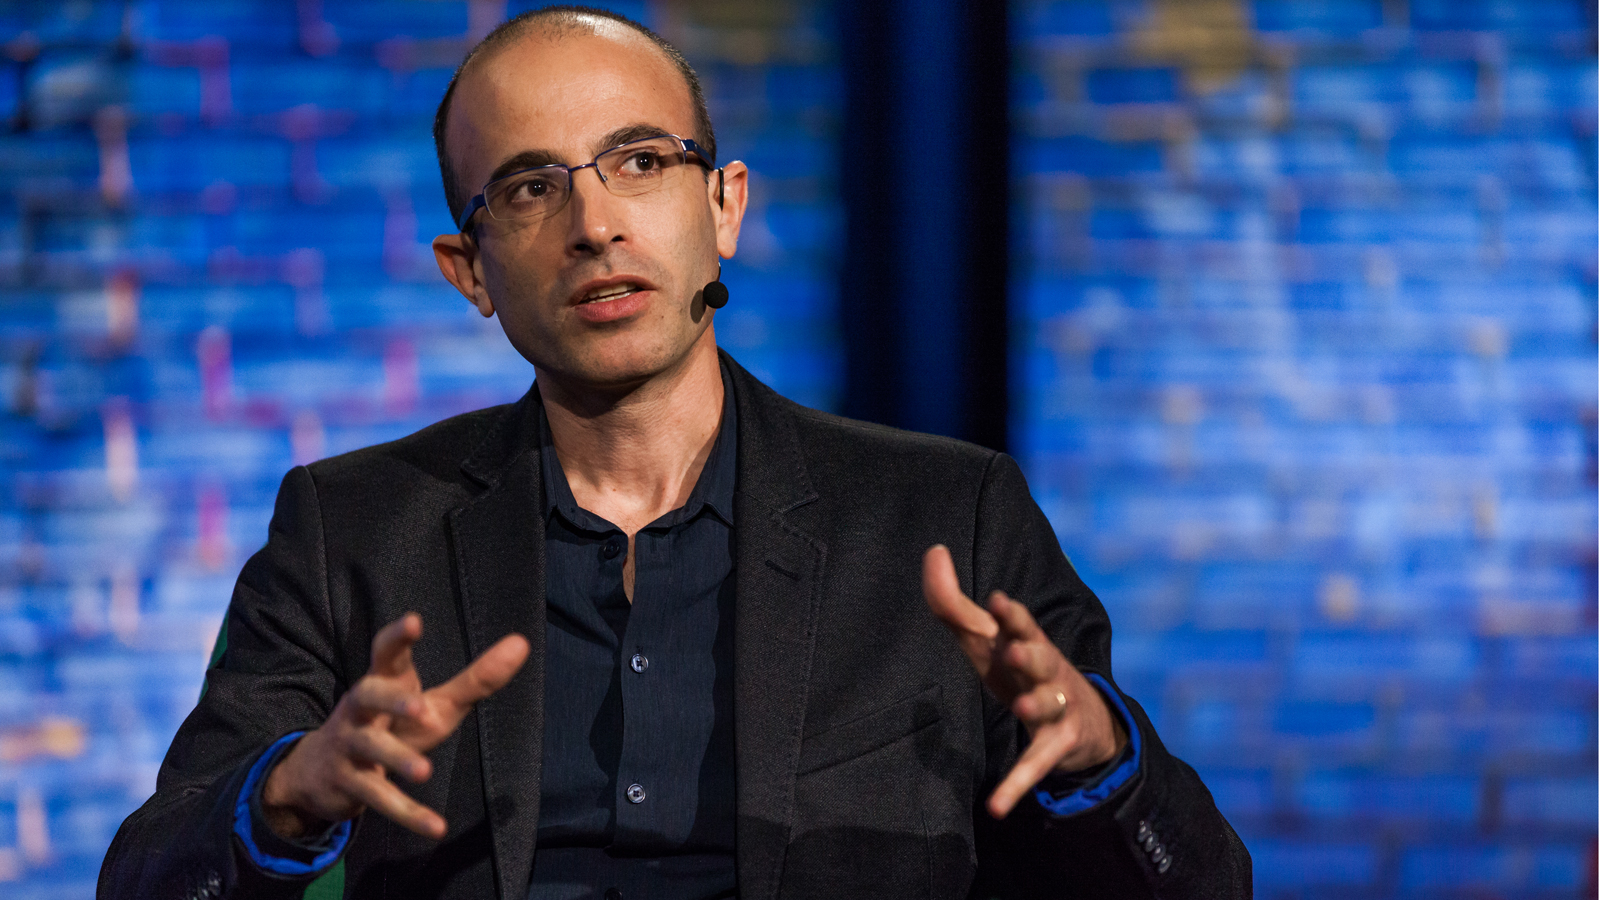 Yuval Harari says: "One of the most powerful forces in history is human stupidity. But another powerful force is human wisdom. We have both.” Photo: Jasmina Tomic / TED